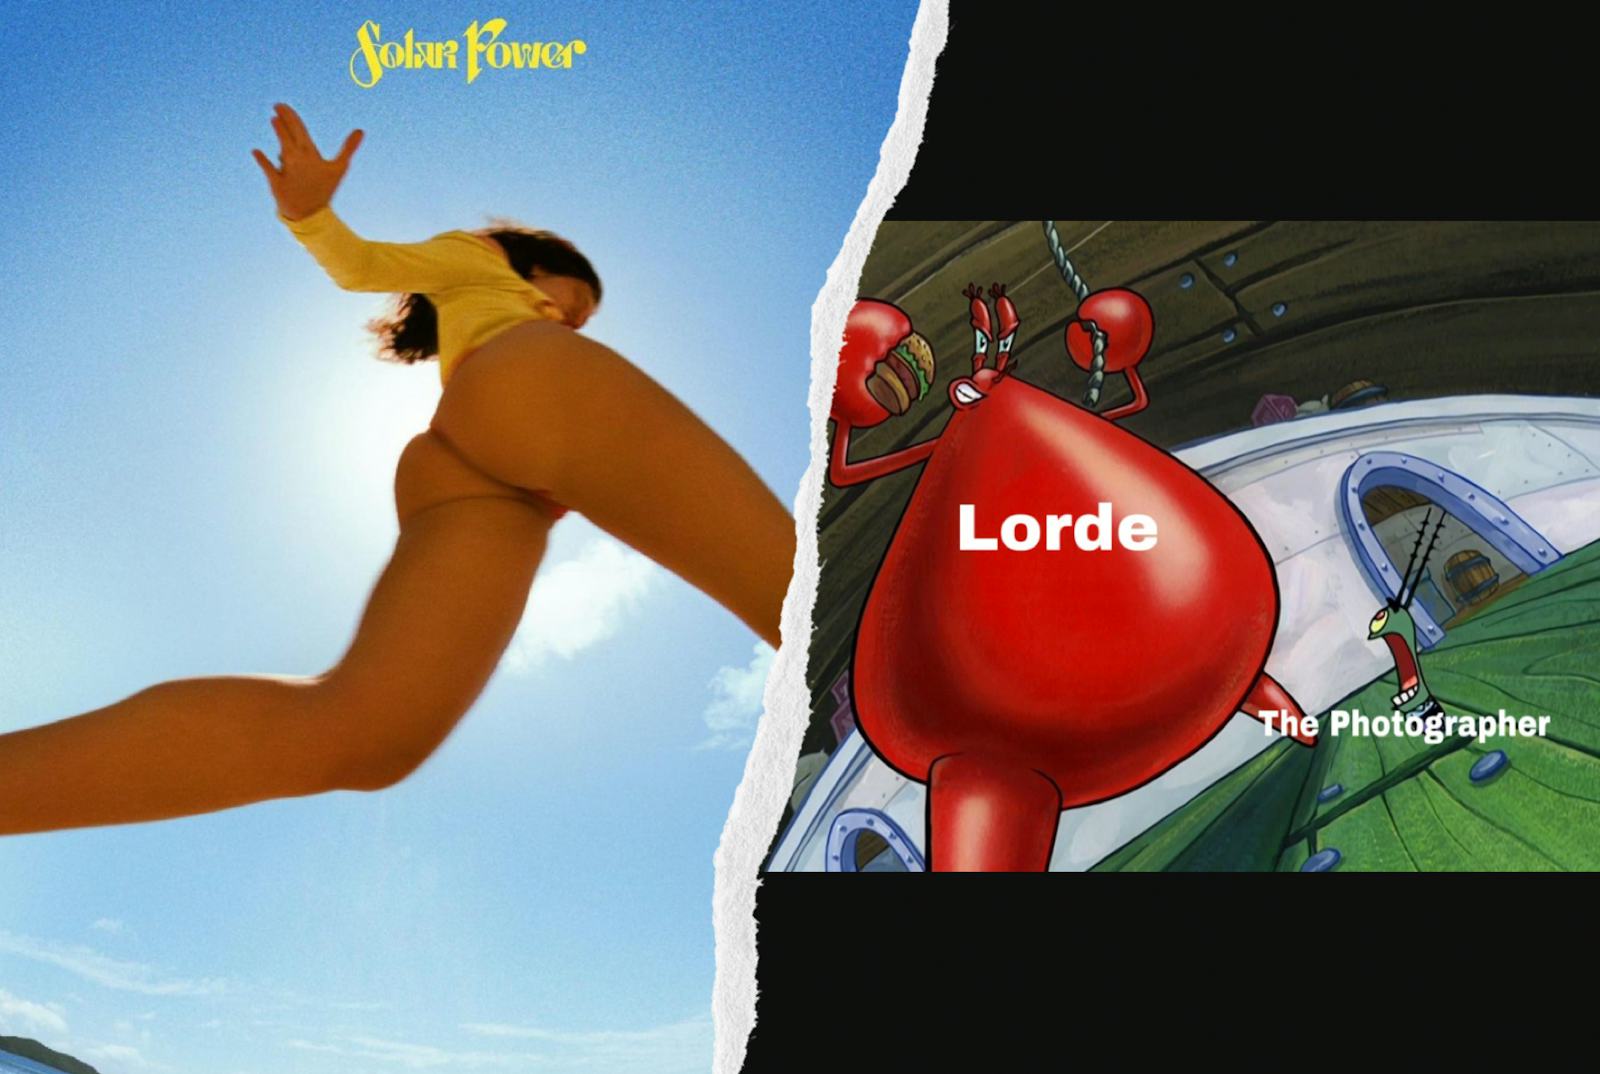 Memes & Tweets About Lorde's Cheeky "Solar Power" Cover